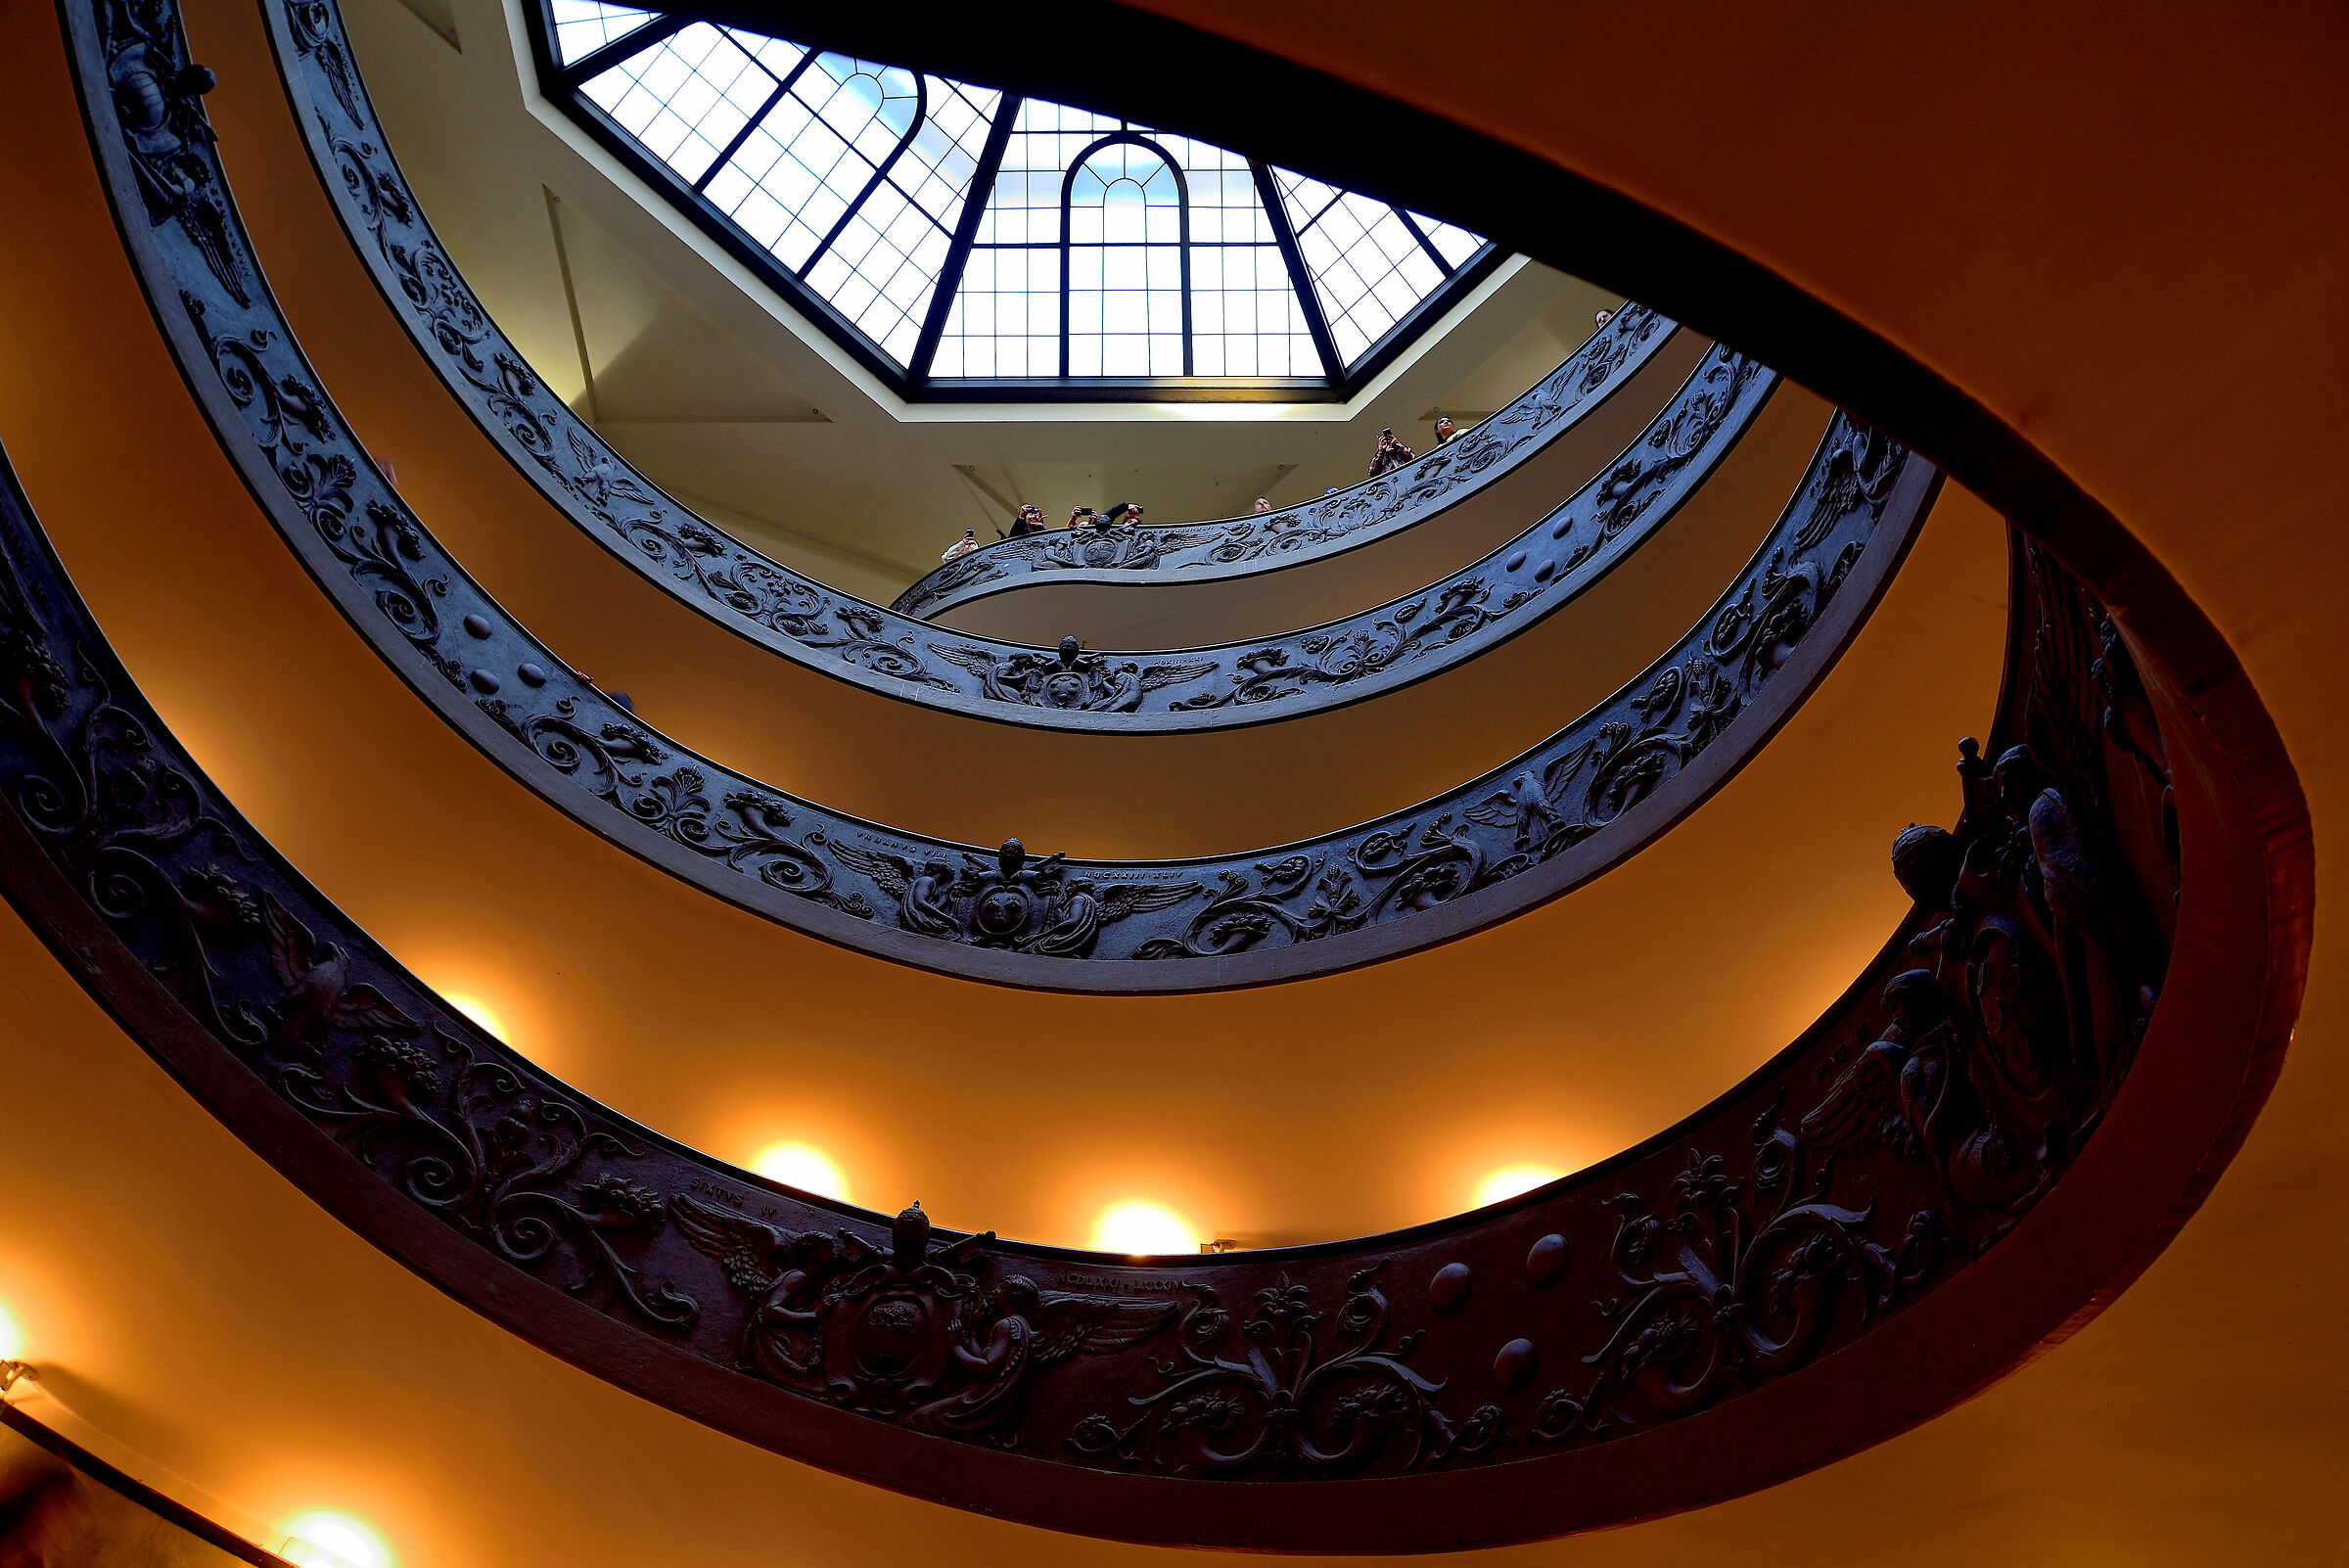 Bramante's Staircase (Vatican Museums)...